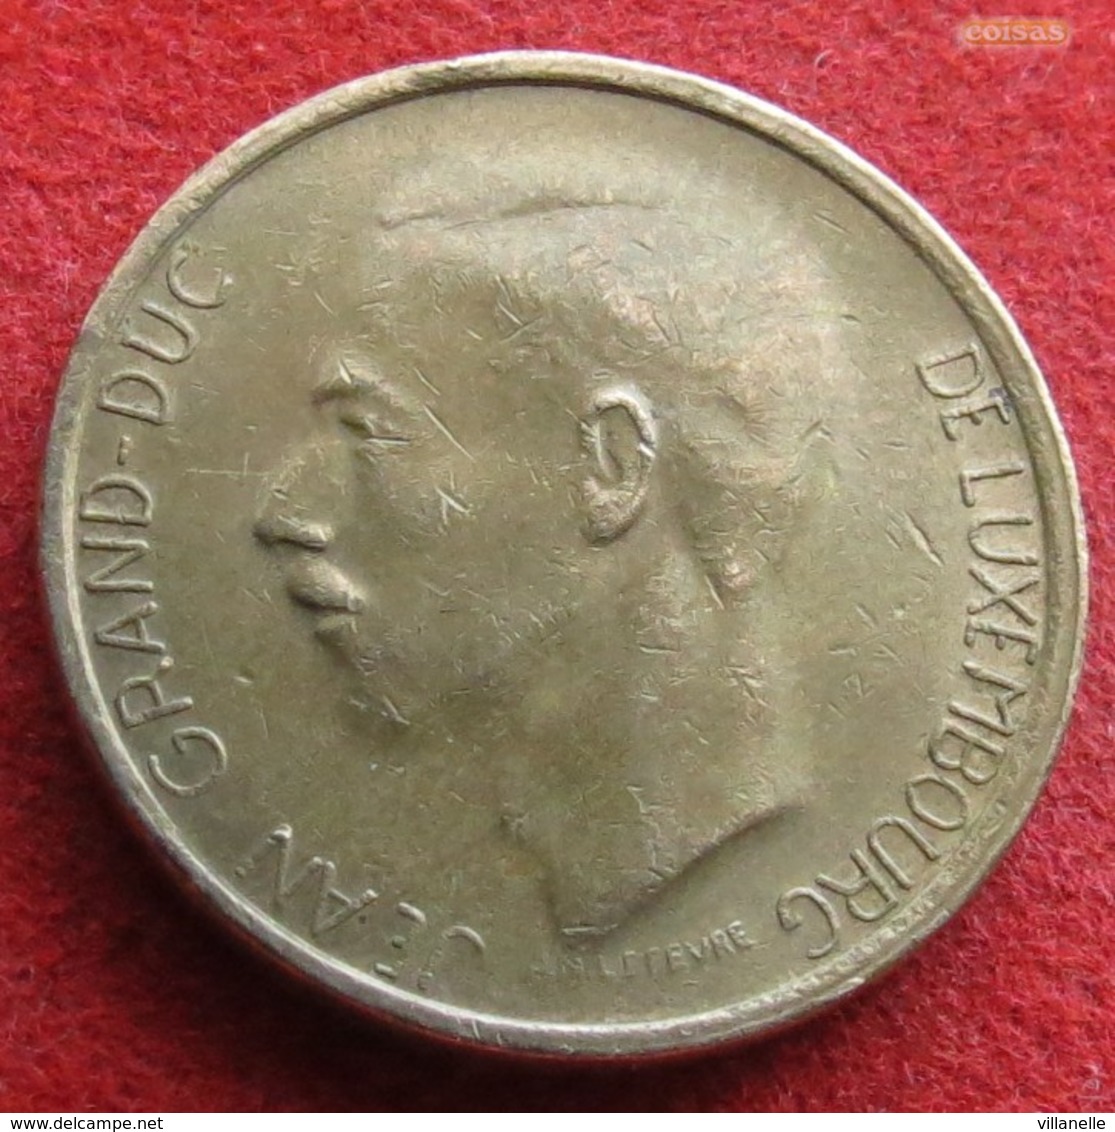 Luxembourg 20 Francs 1983 KM# 58  Luxemburgo - Luxembourg